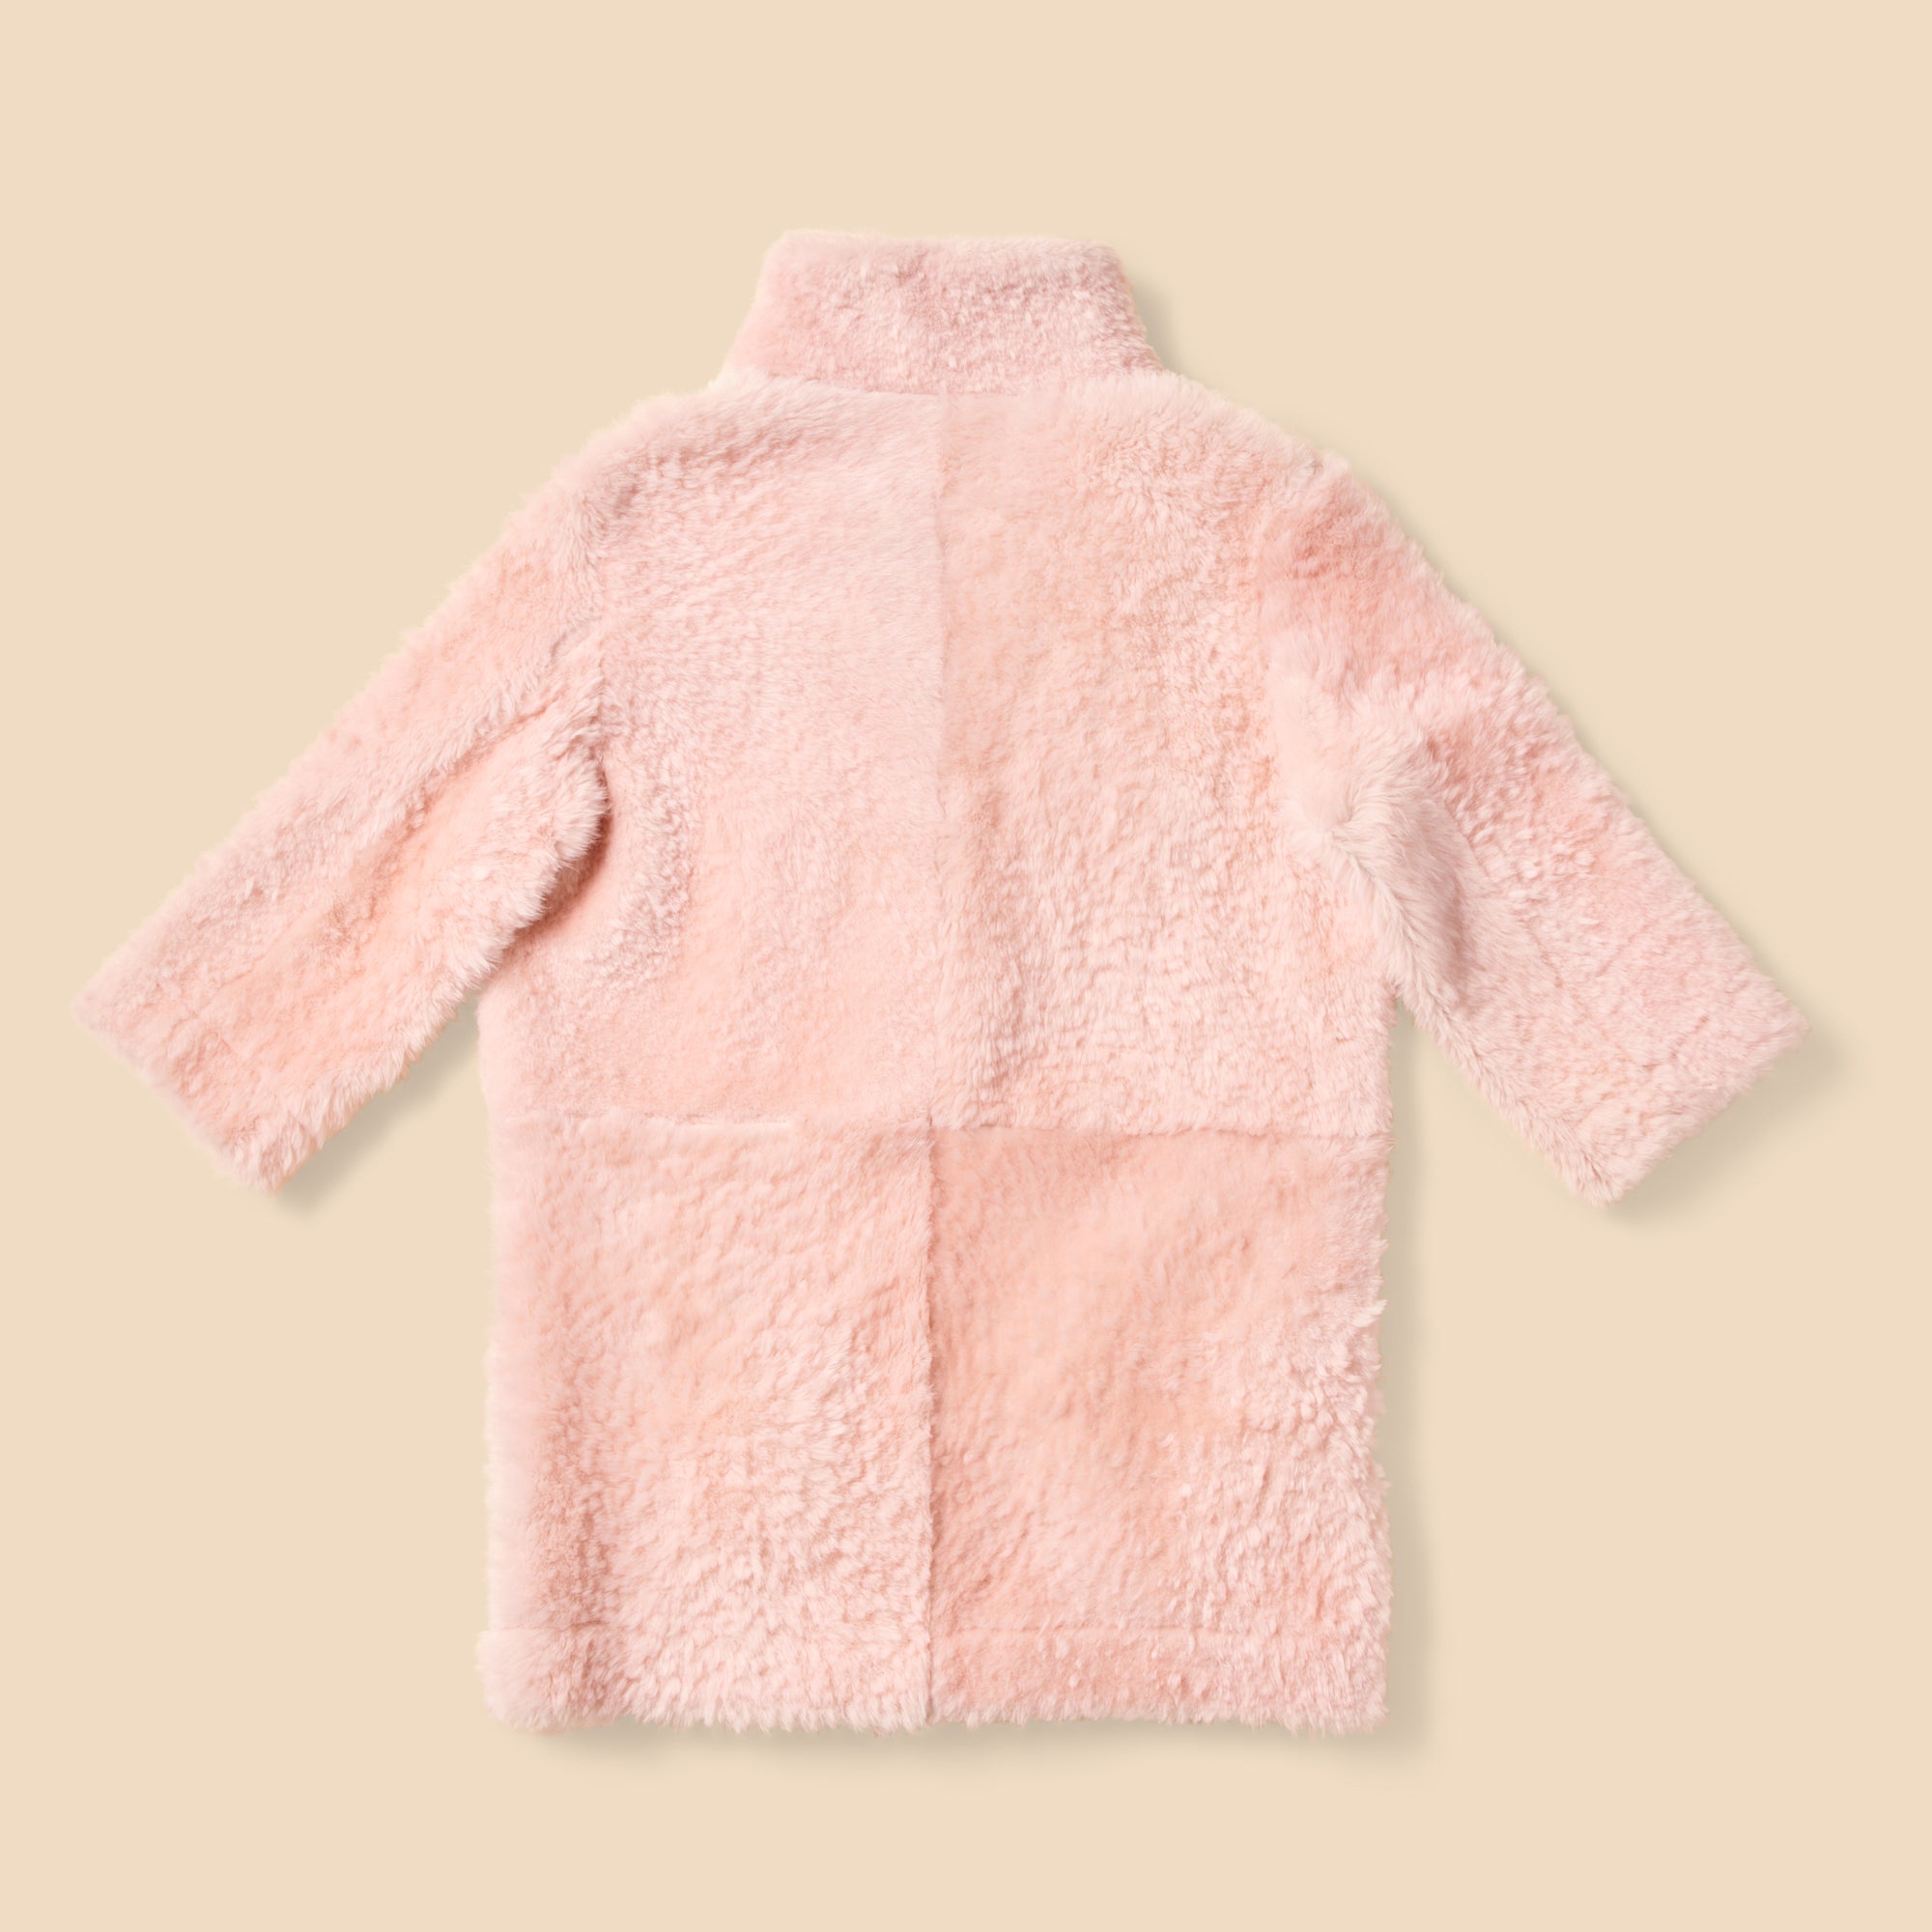 Nat Coat in Cotton Candy Shearling